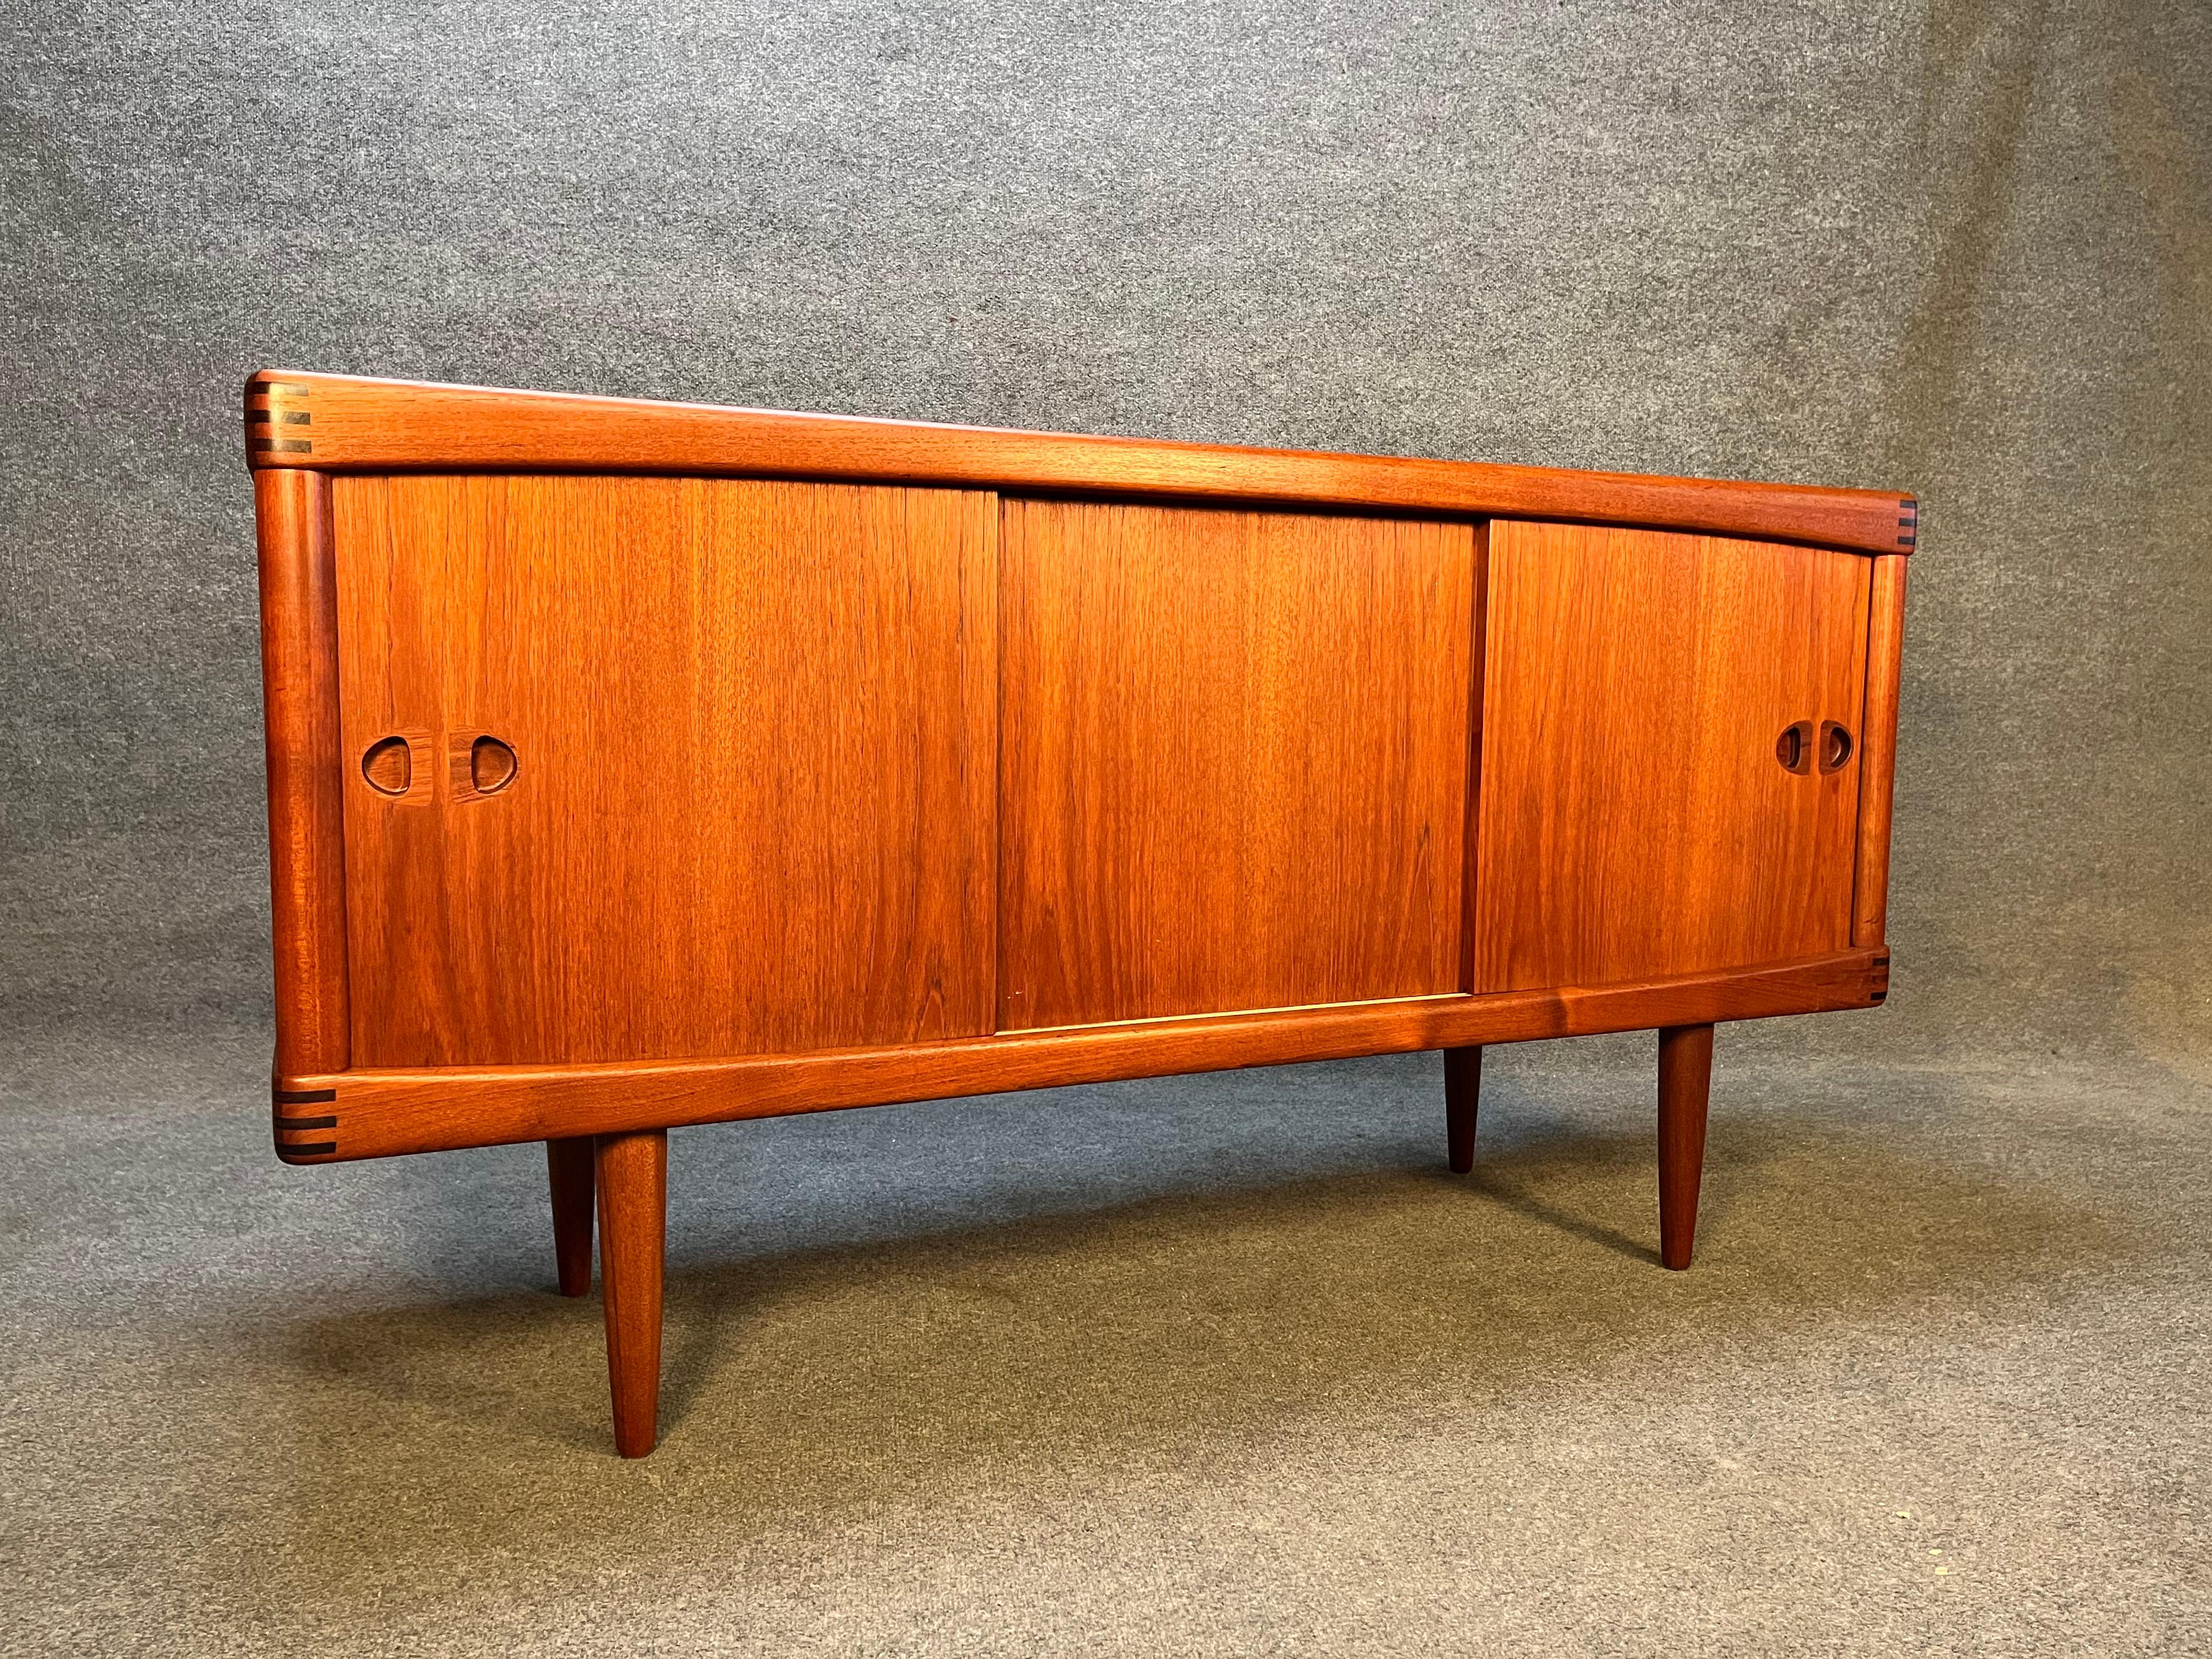 Here is a rare and beautiful credenza designed by H.W. Klein for Bramin Møbler in Denmark circa 1960’s. Impeccably crafted in teak wood, this compact credenza offers two sliding doors on each side with shelved compartments within. Each door features